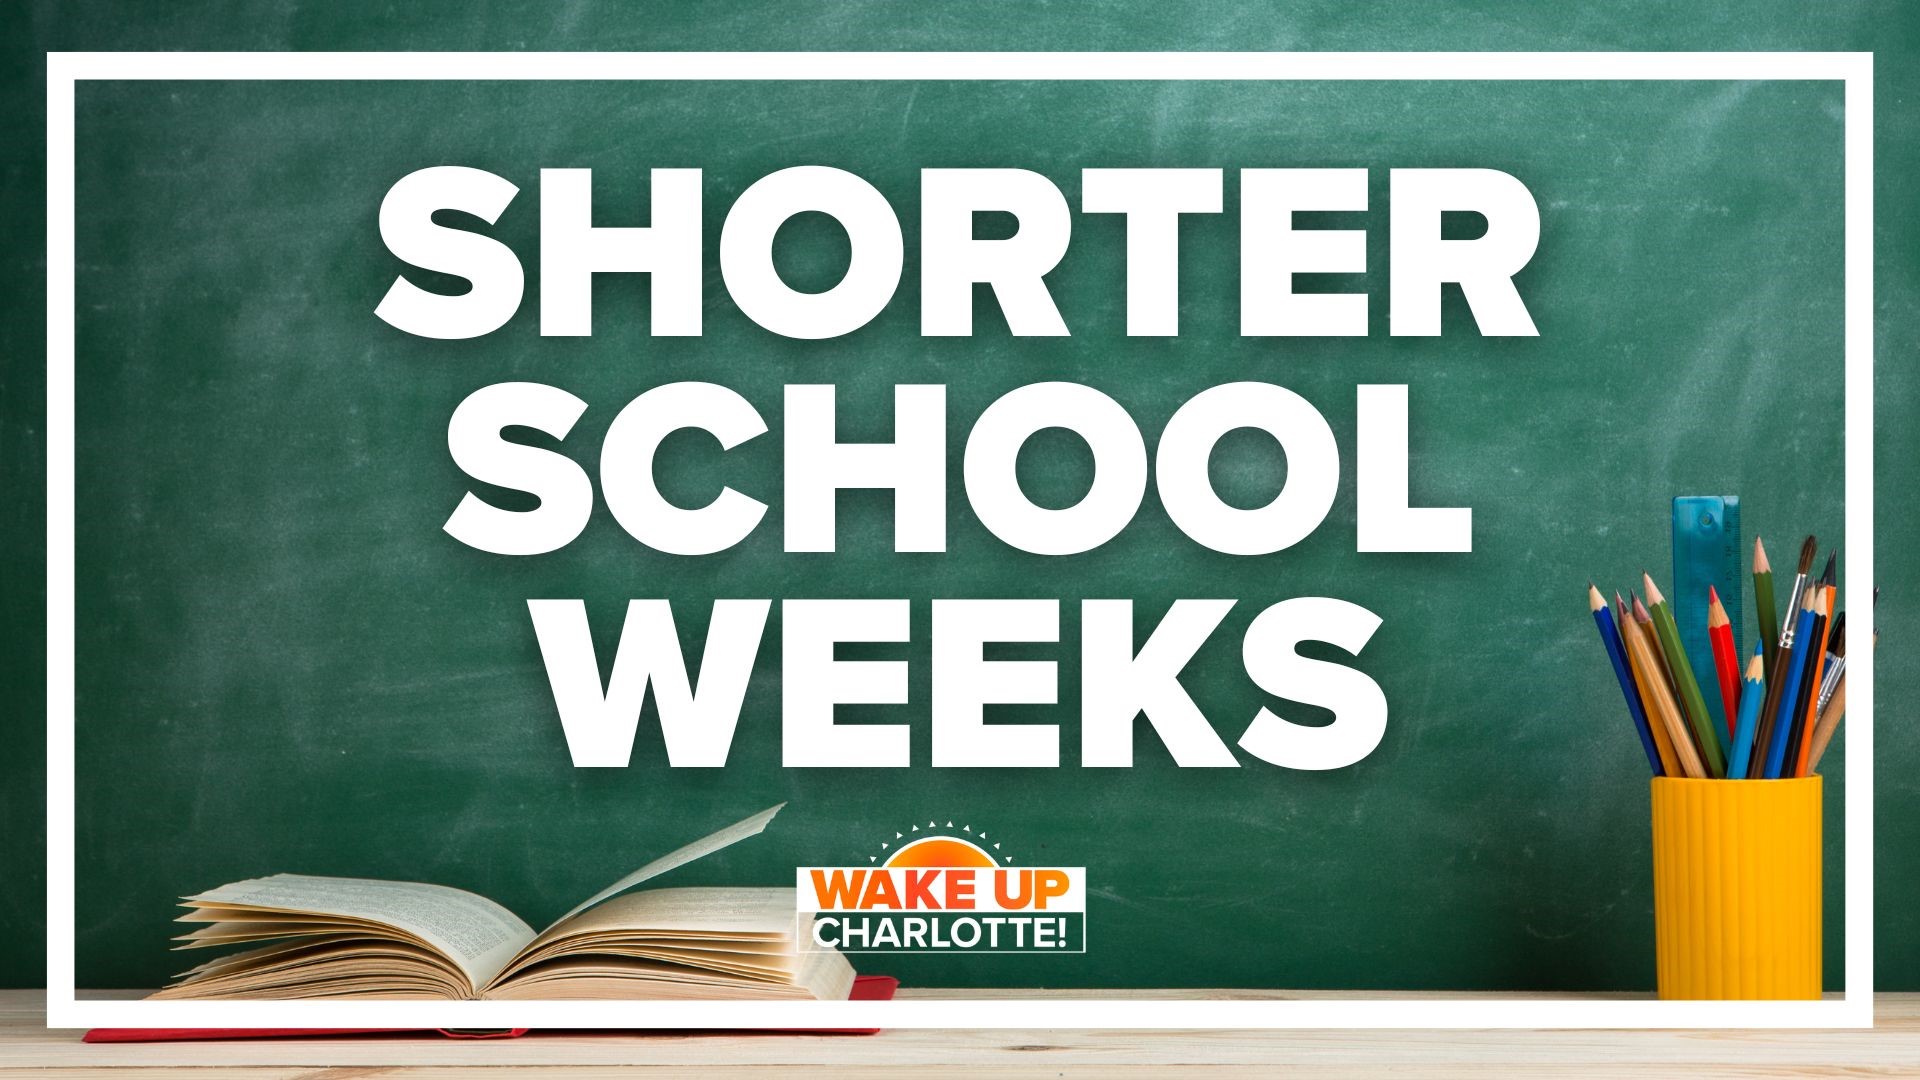 Should schools switch to 4day weeks due to teacher shortages?